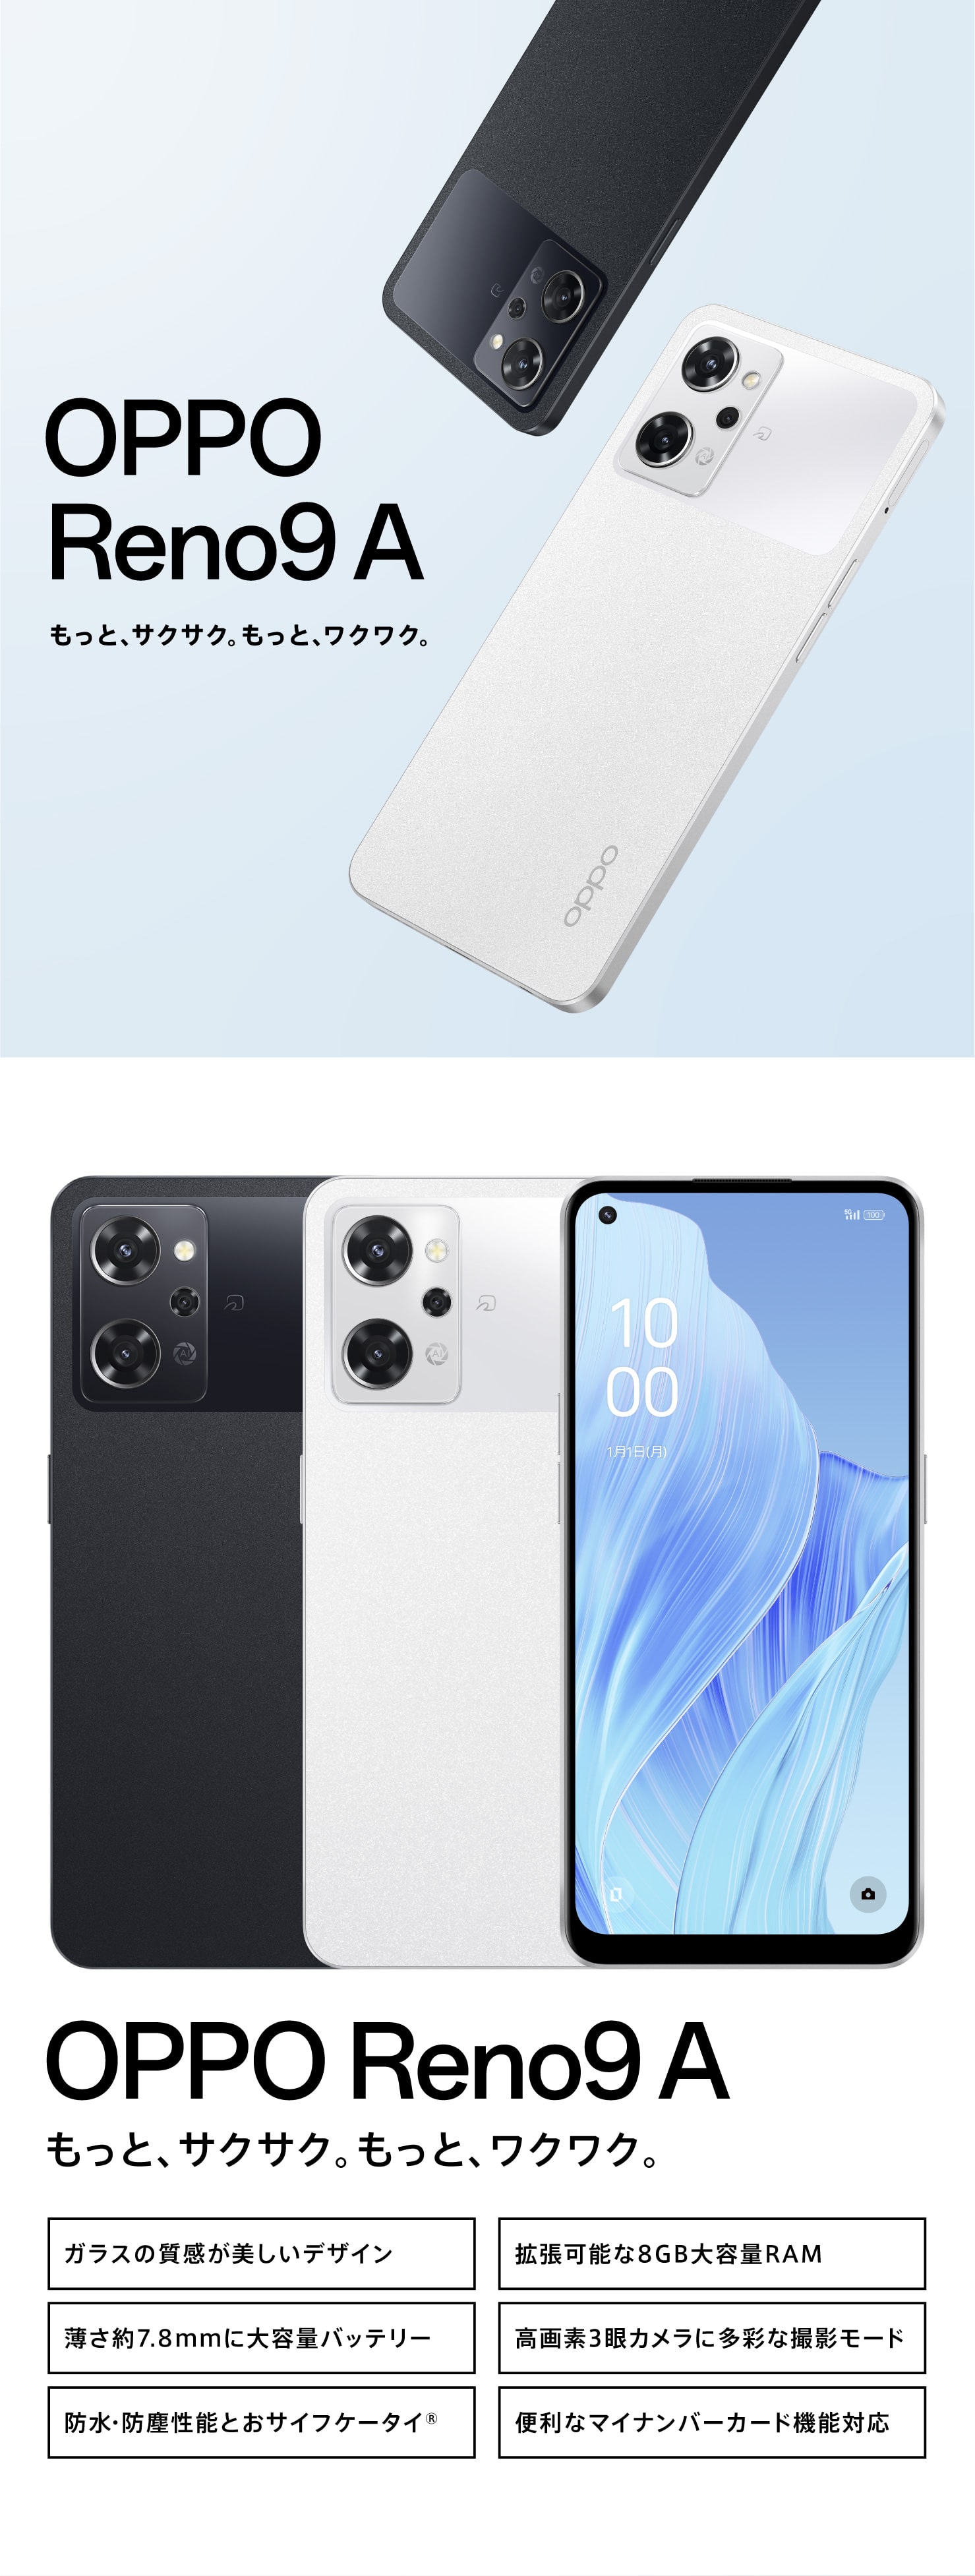 Oppo ymobile  OPPO Reno9 A ムーンホワイト 8GB 128GB A301OP保証期間３ヶ月